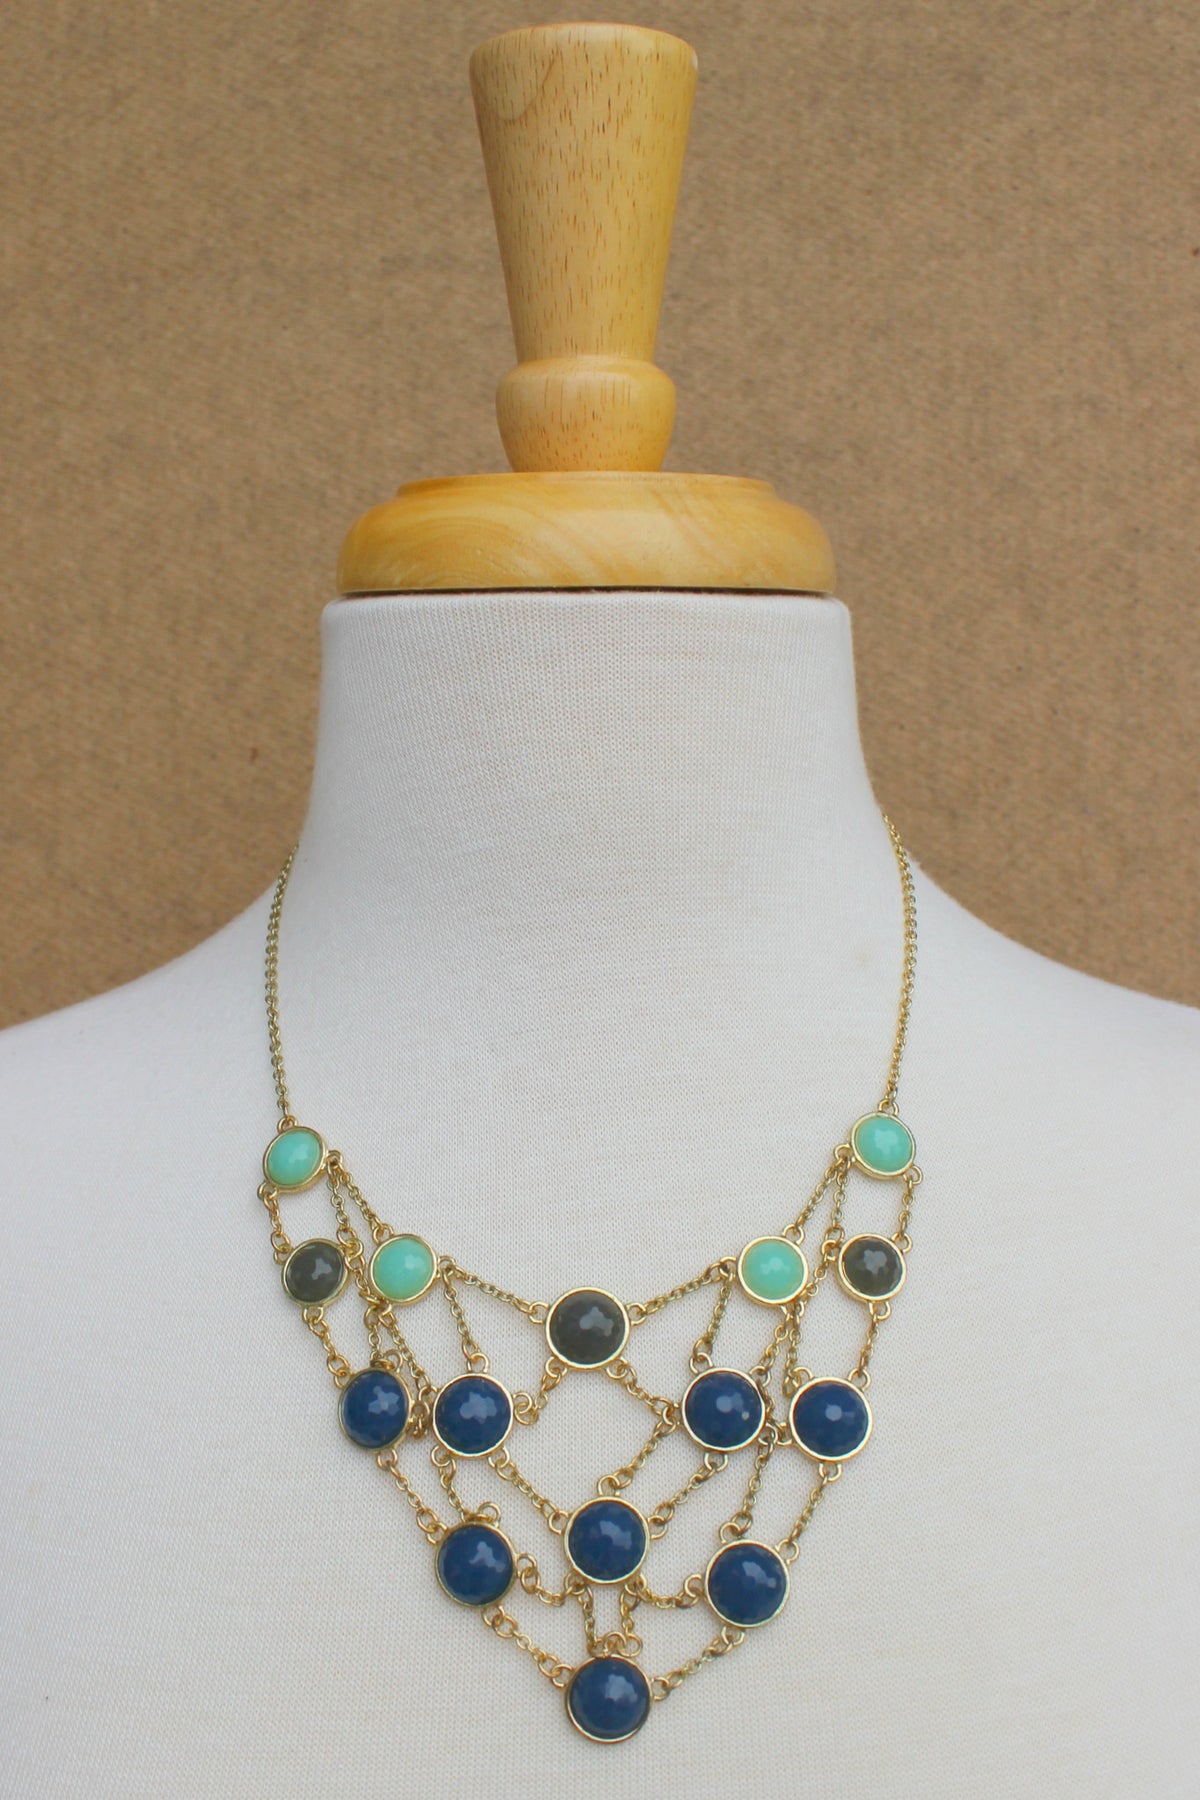 Beaded Net Necklace - Royal